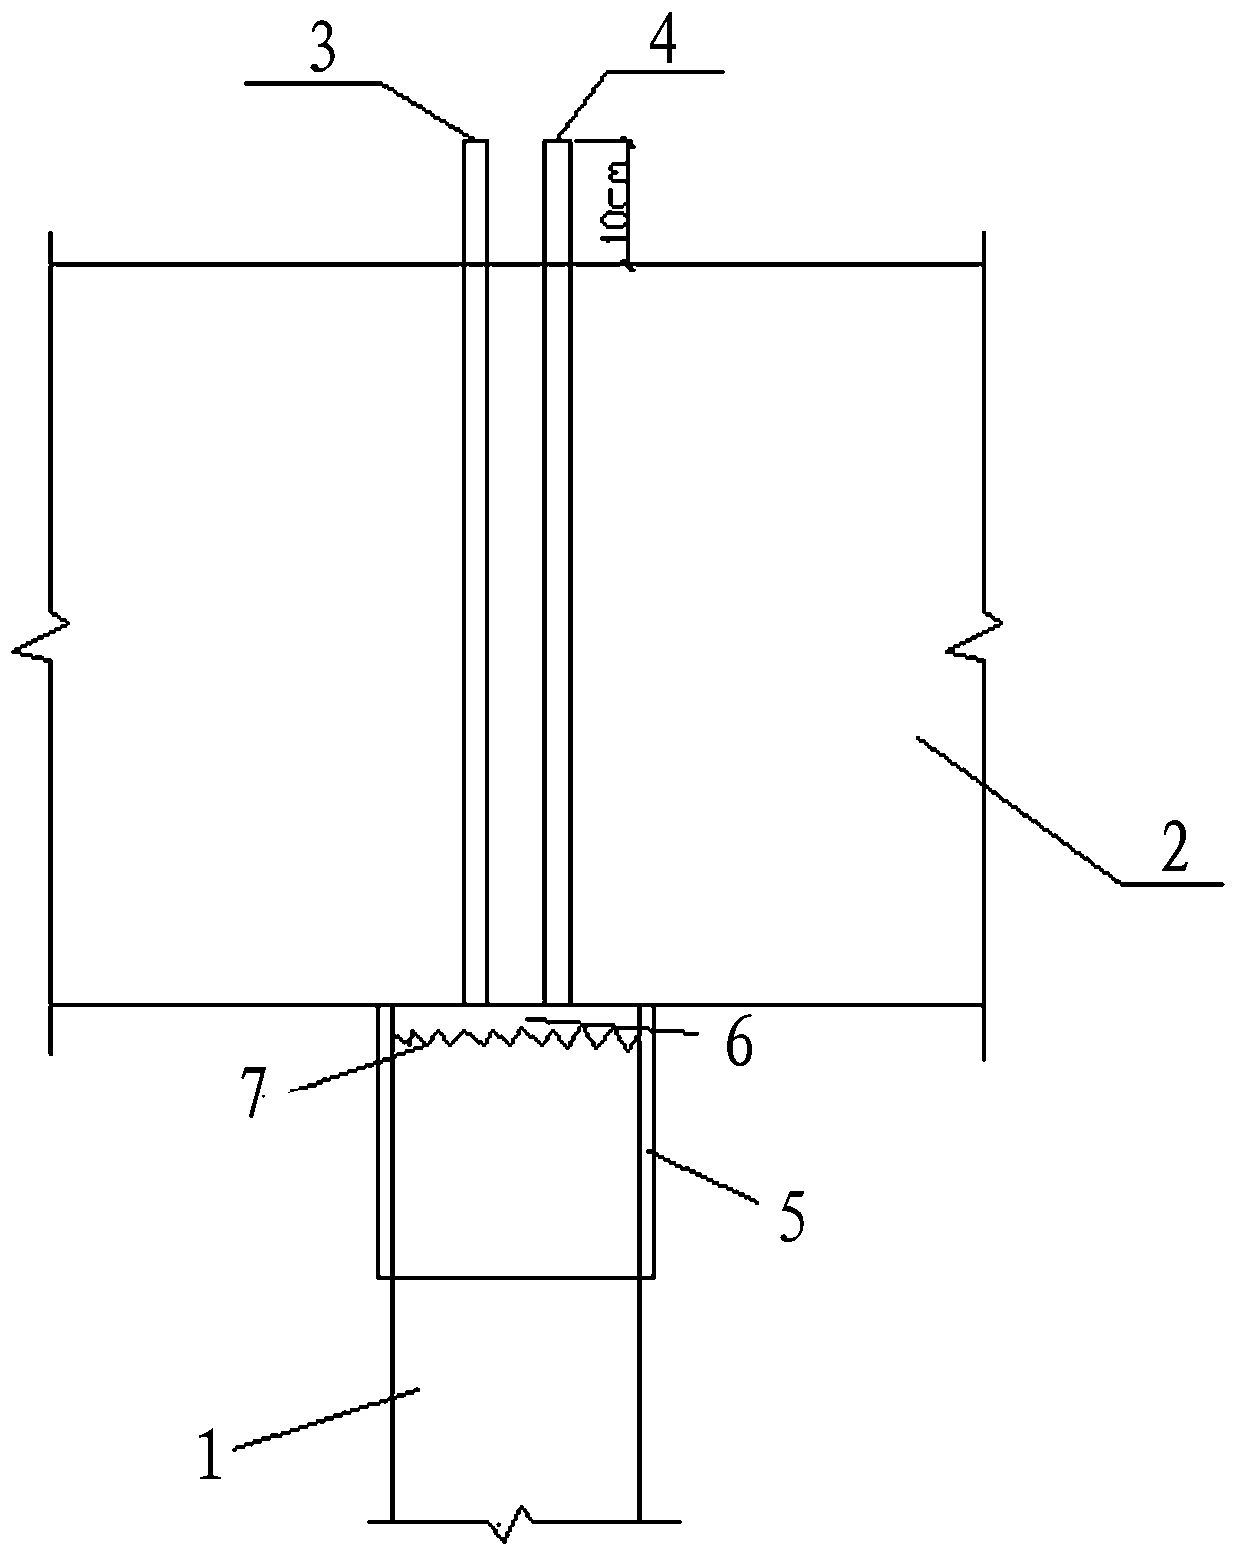 Construction Method of Grouting at the Top of Structural Column